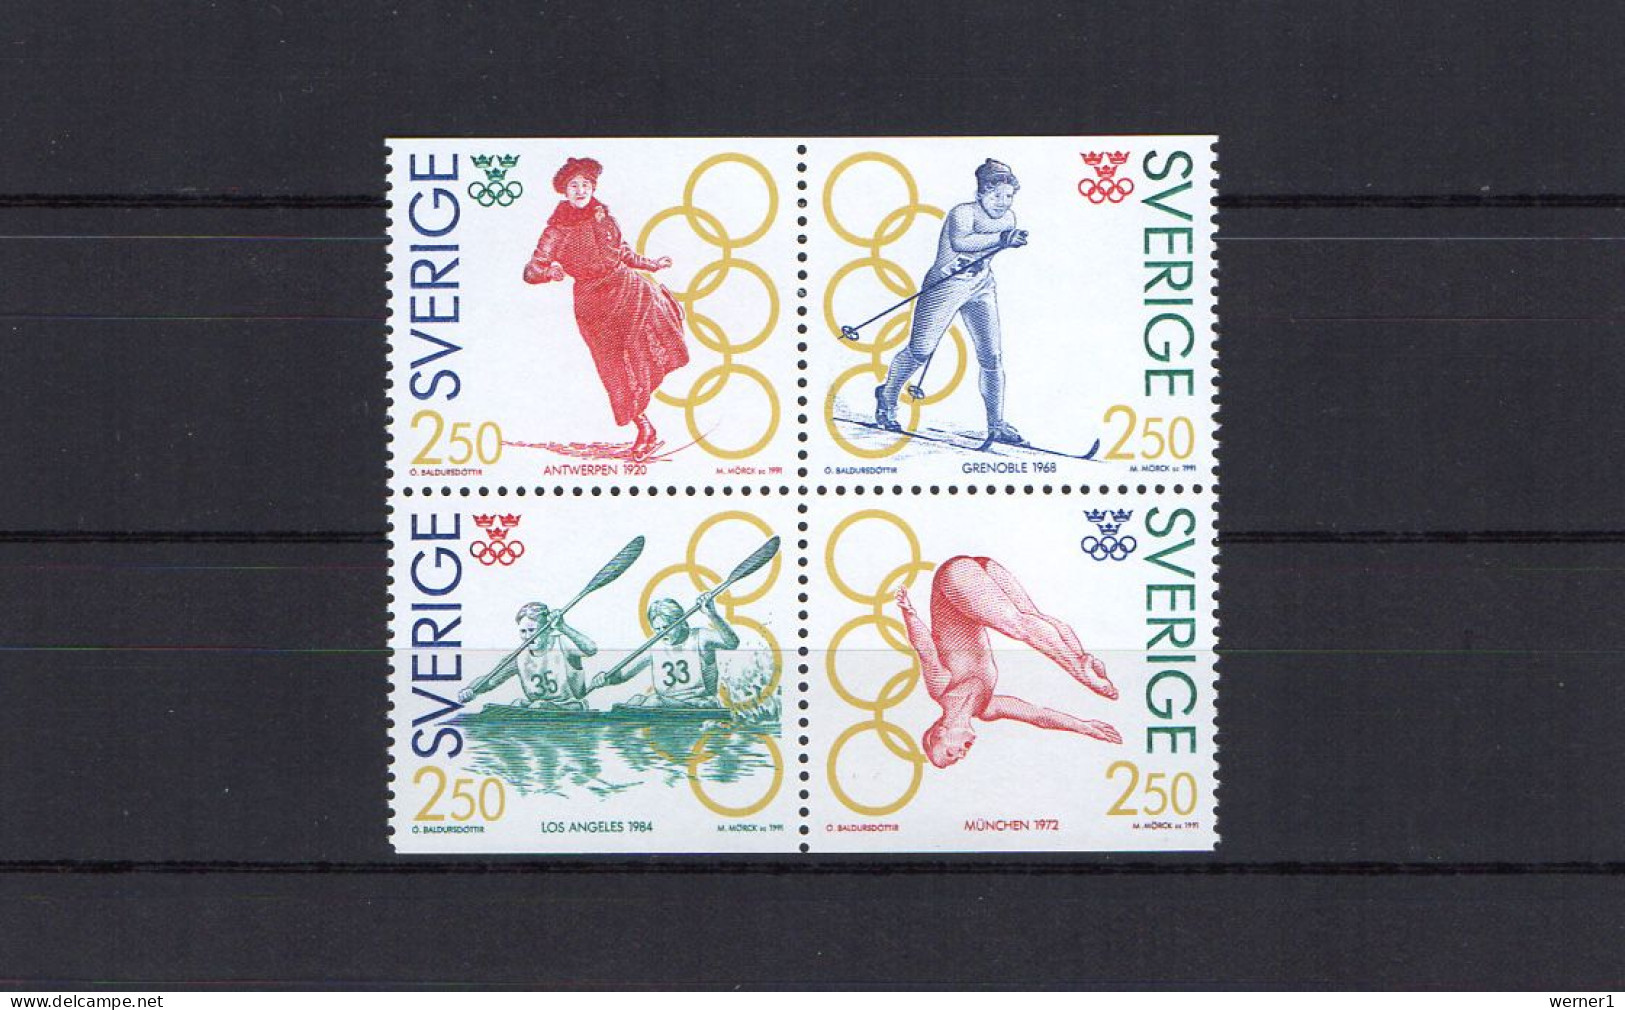 Sweden 1991 Olympic Games, Rowing Etc. Block Of 4 MNH - Ete 1992: Barcelone